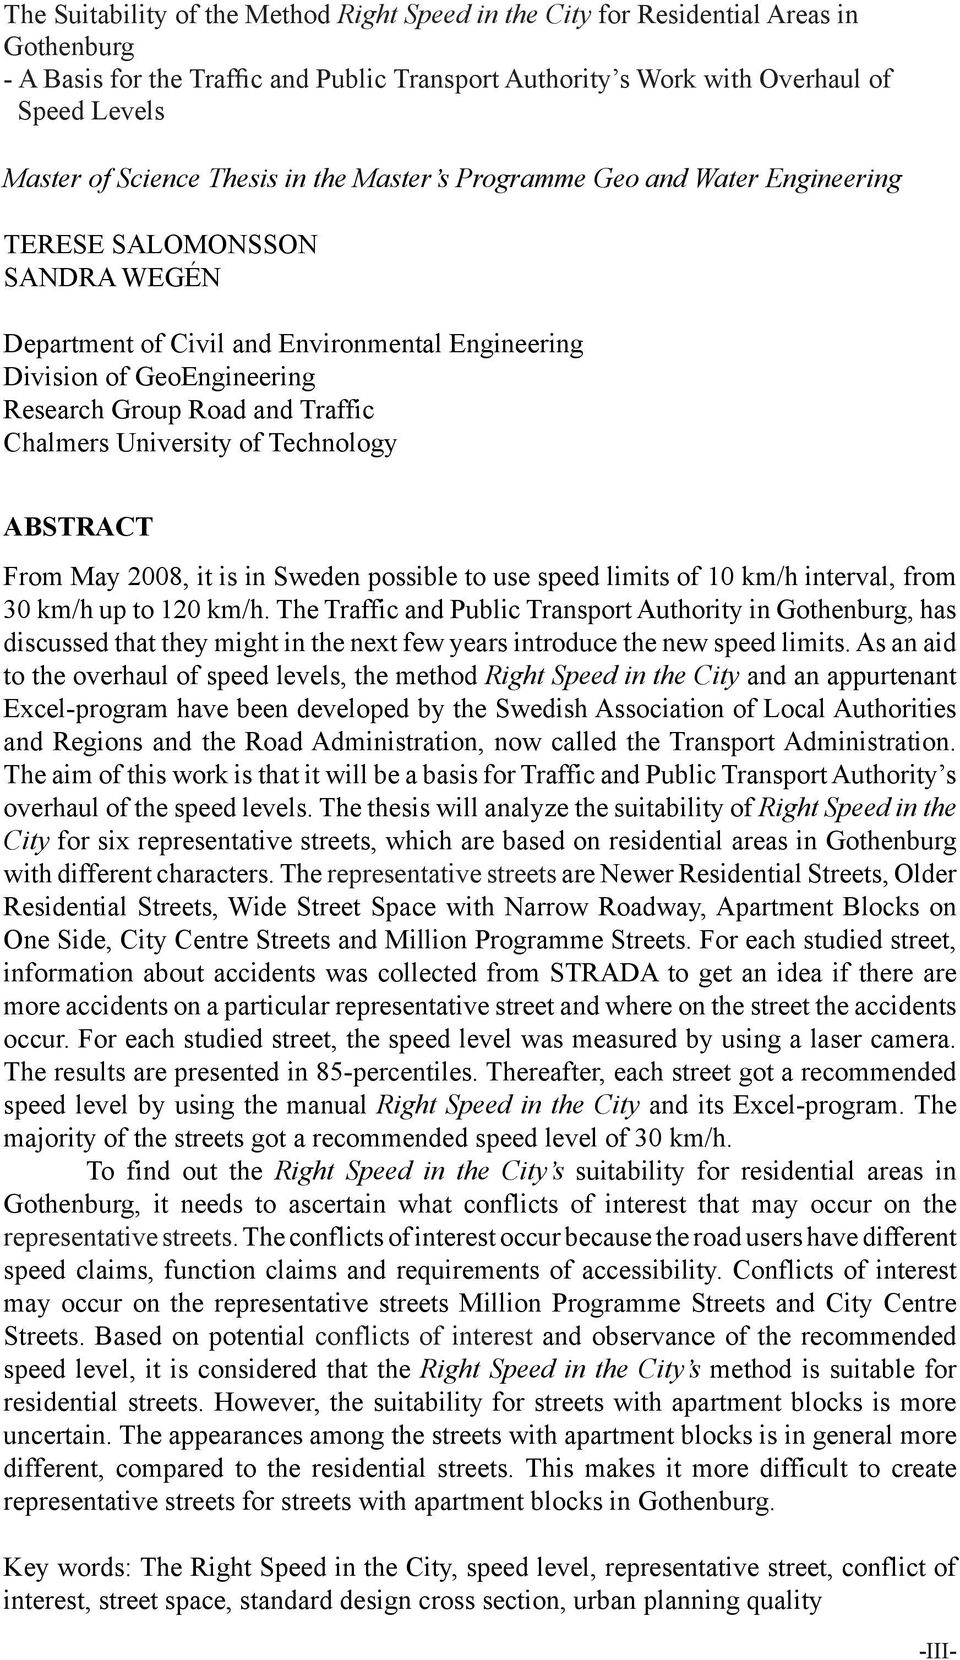 Traffic Chalmers University of Technology ABSTRACT From May 2008, it is in Sweden possible to use speed limits of 10 km/h interval, from 30 km/h up to 120 km/h.